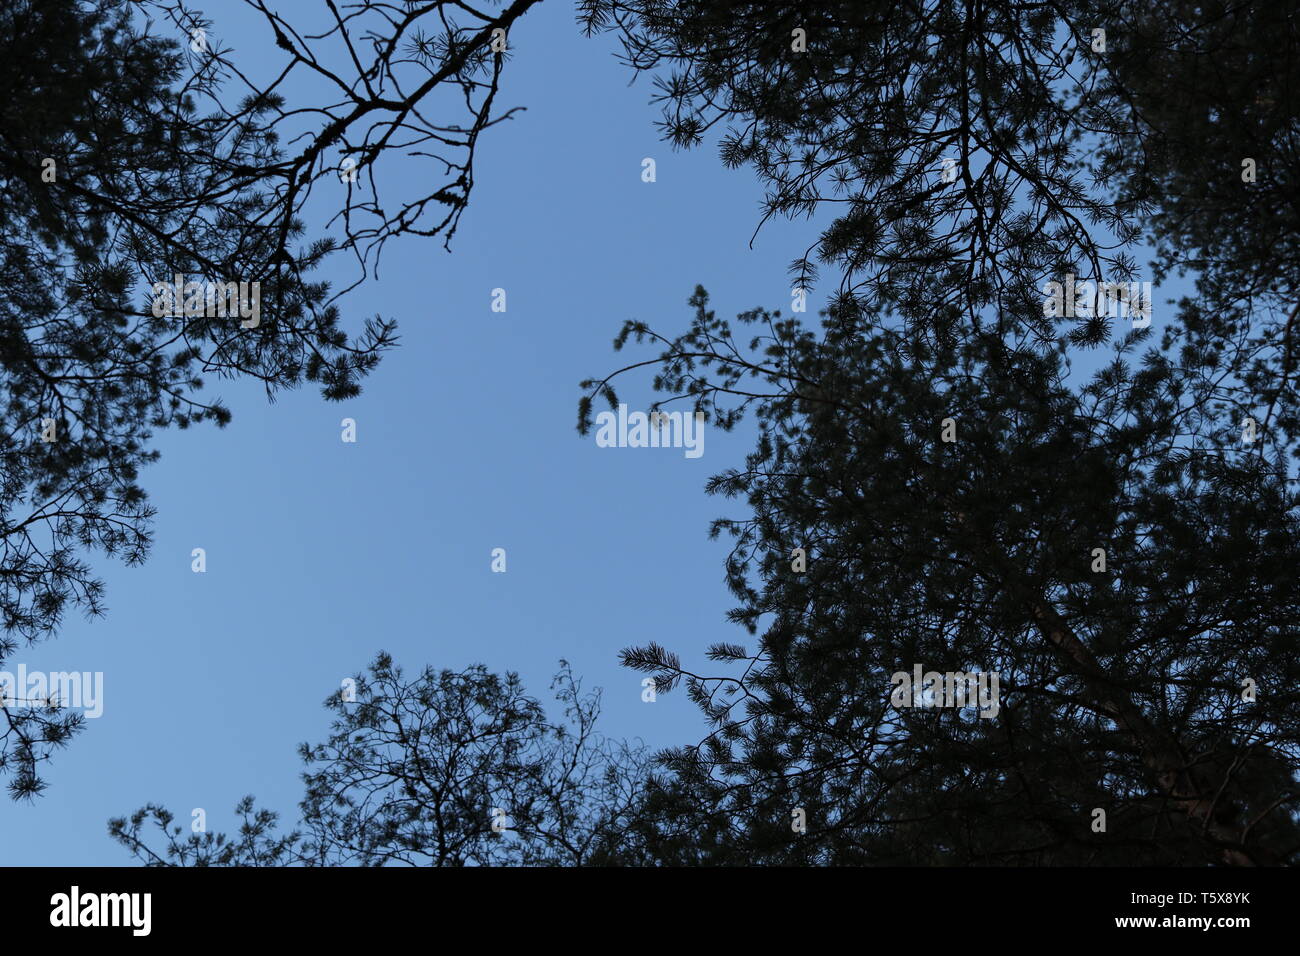 A cloudless sky though a pine forest ceiling in a darkening evening. Stock Photo